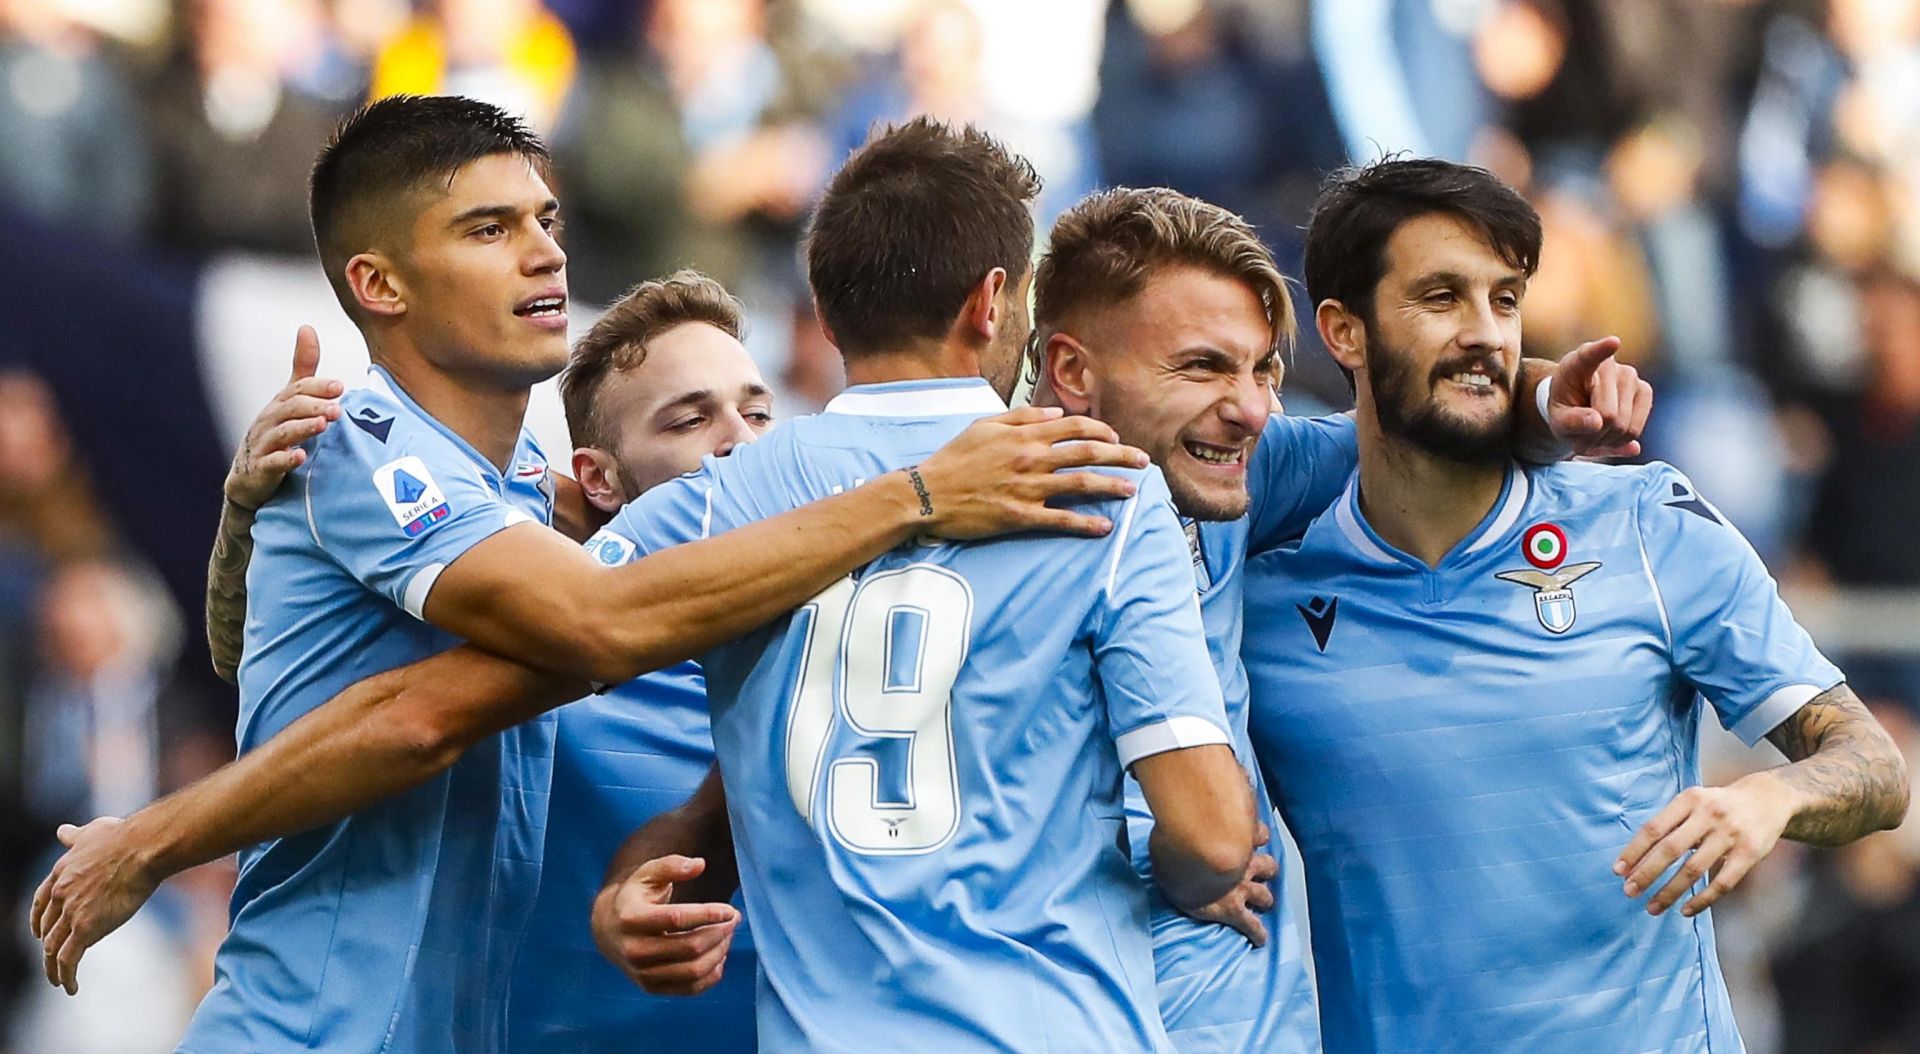 epa08037246 Lazio's Ciro Immobile (2-R) jubilates with his teammates after scoring the 1-0 goal during the Italian Serie A soccer match SS Lazio vs Udinese Calcio at Olimpico stadium in Rome, Italy, 01 December 2019.  EPA/ANGELO CARCONI